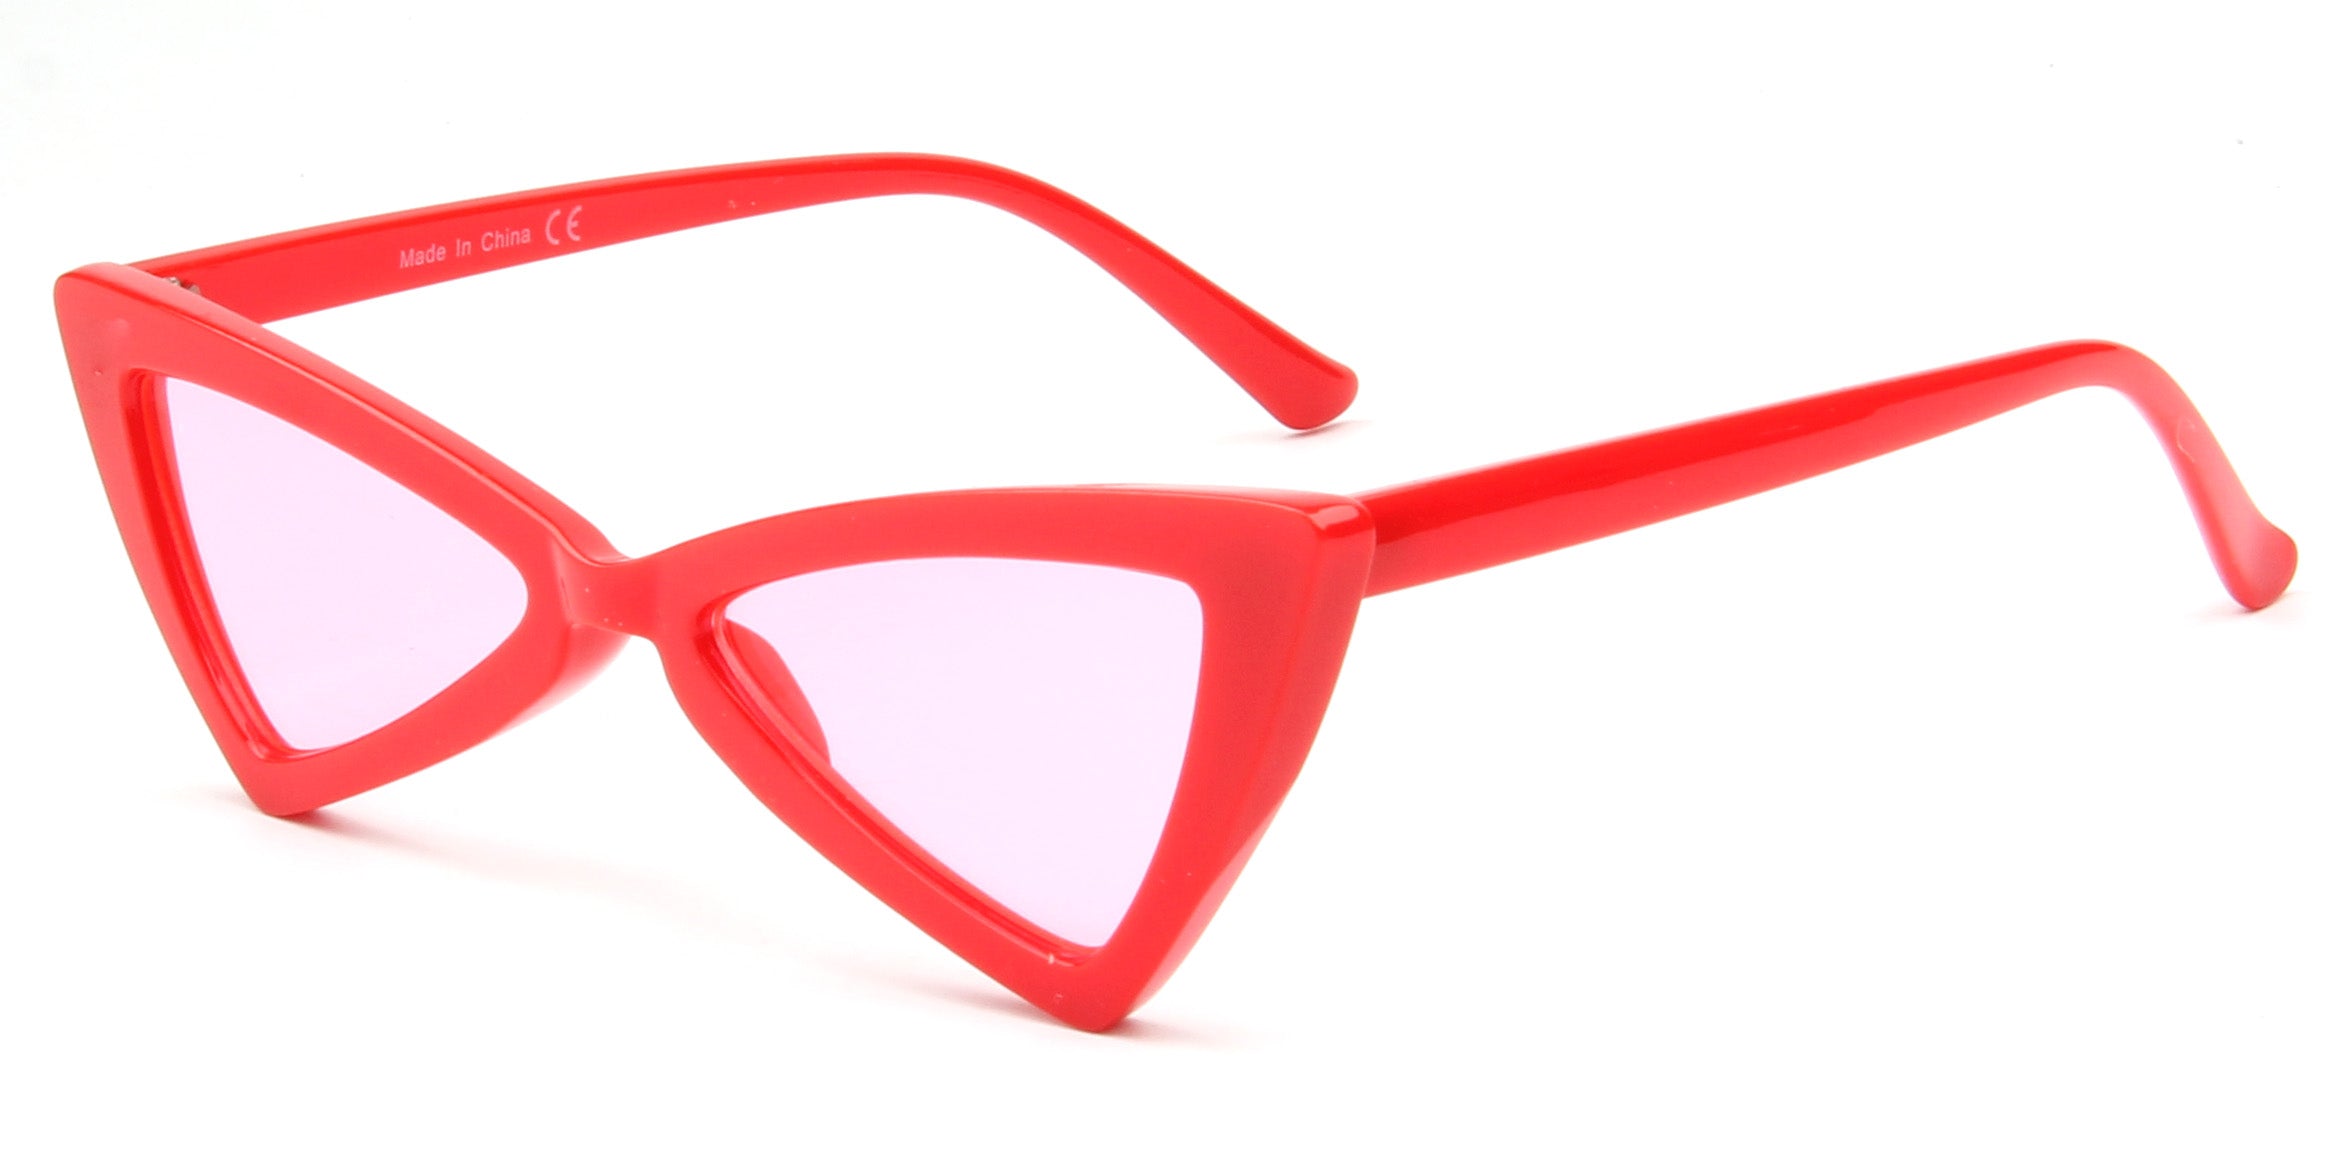 S1053 - Women High Pointed Cat Eye SUNGLASSES Red / Pink